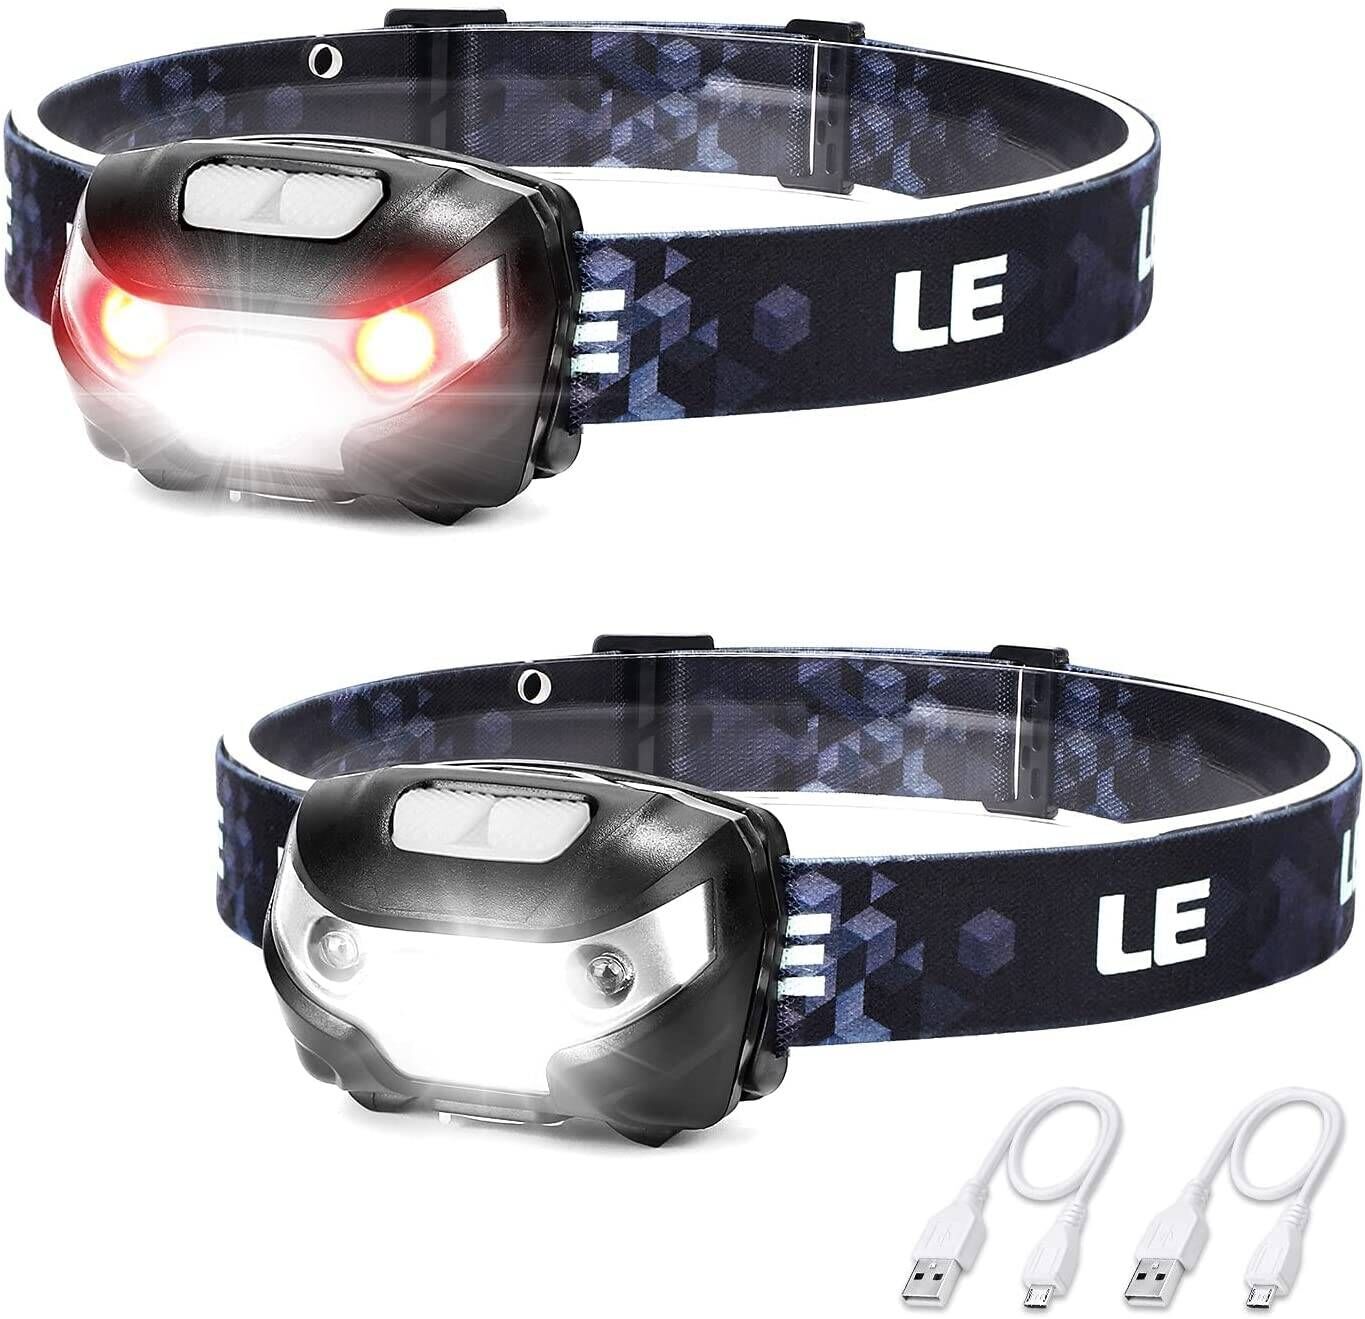 Led Headlamp 2 Pack Rechargeable Head Lamp Flashlight Motion